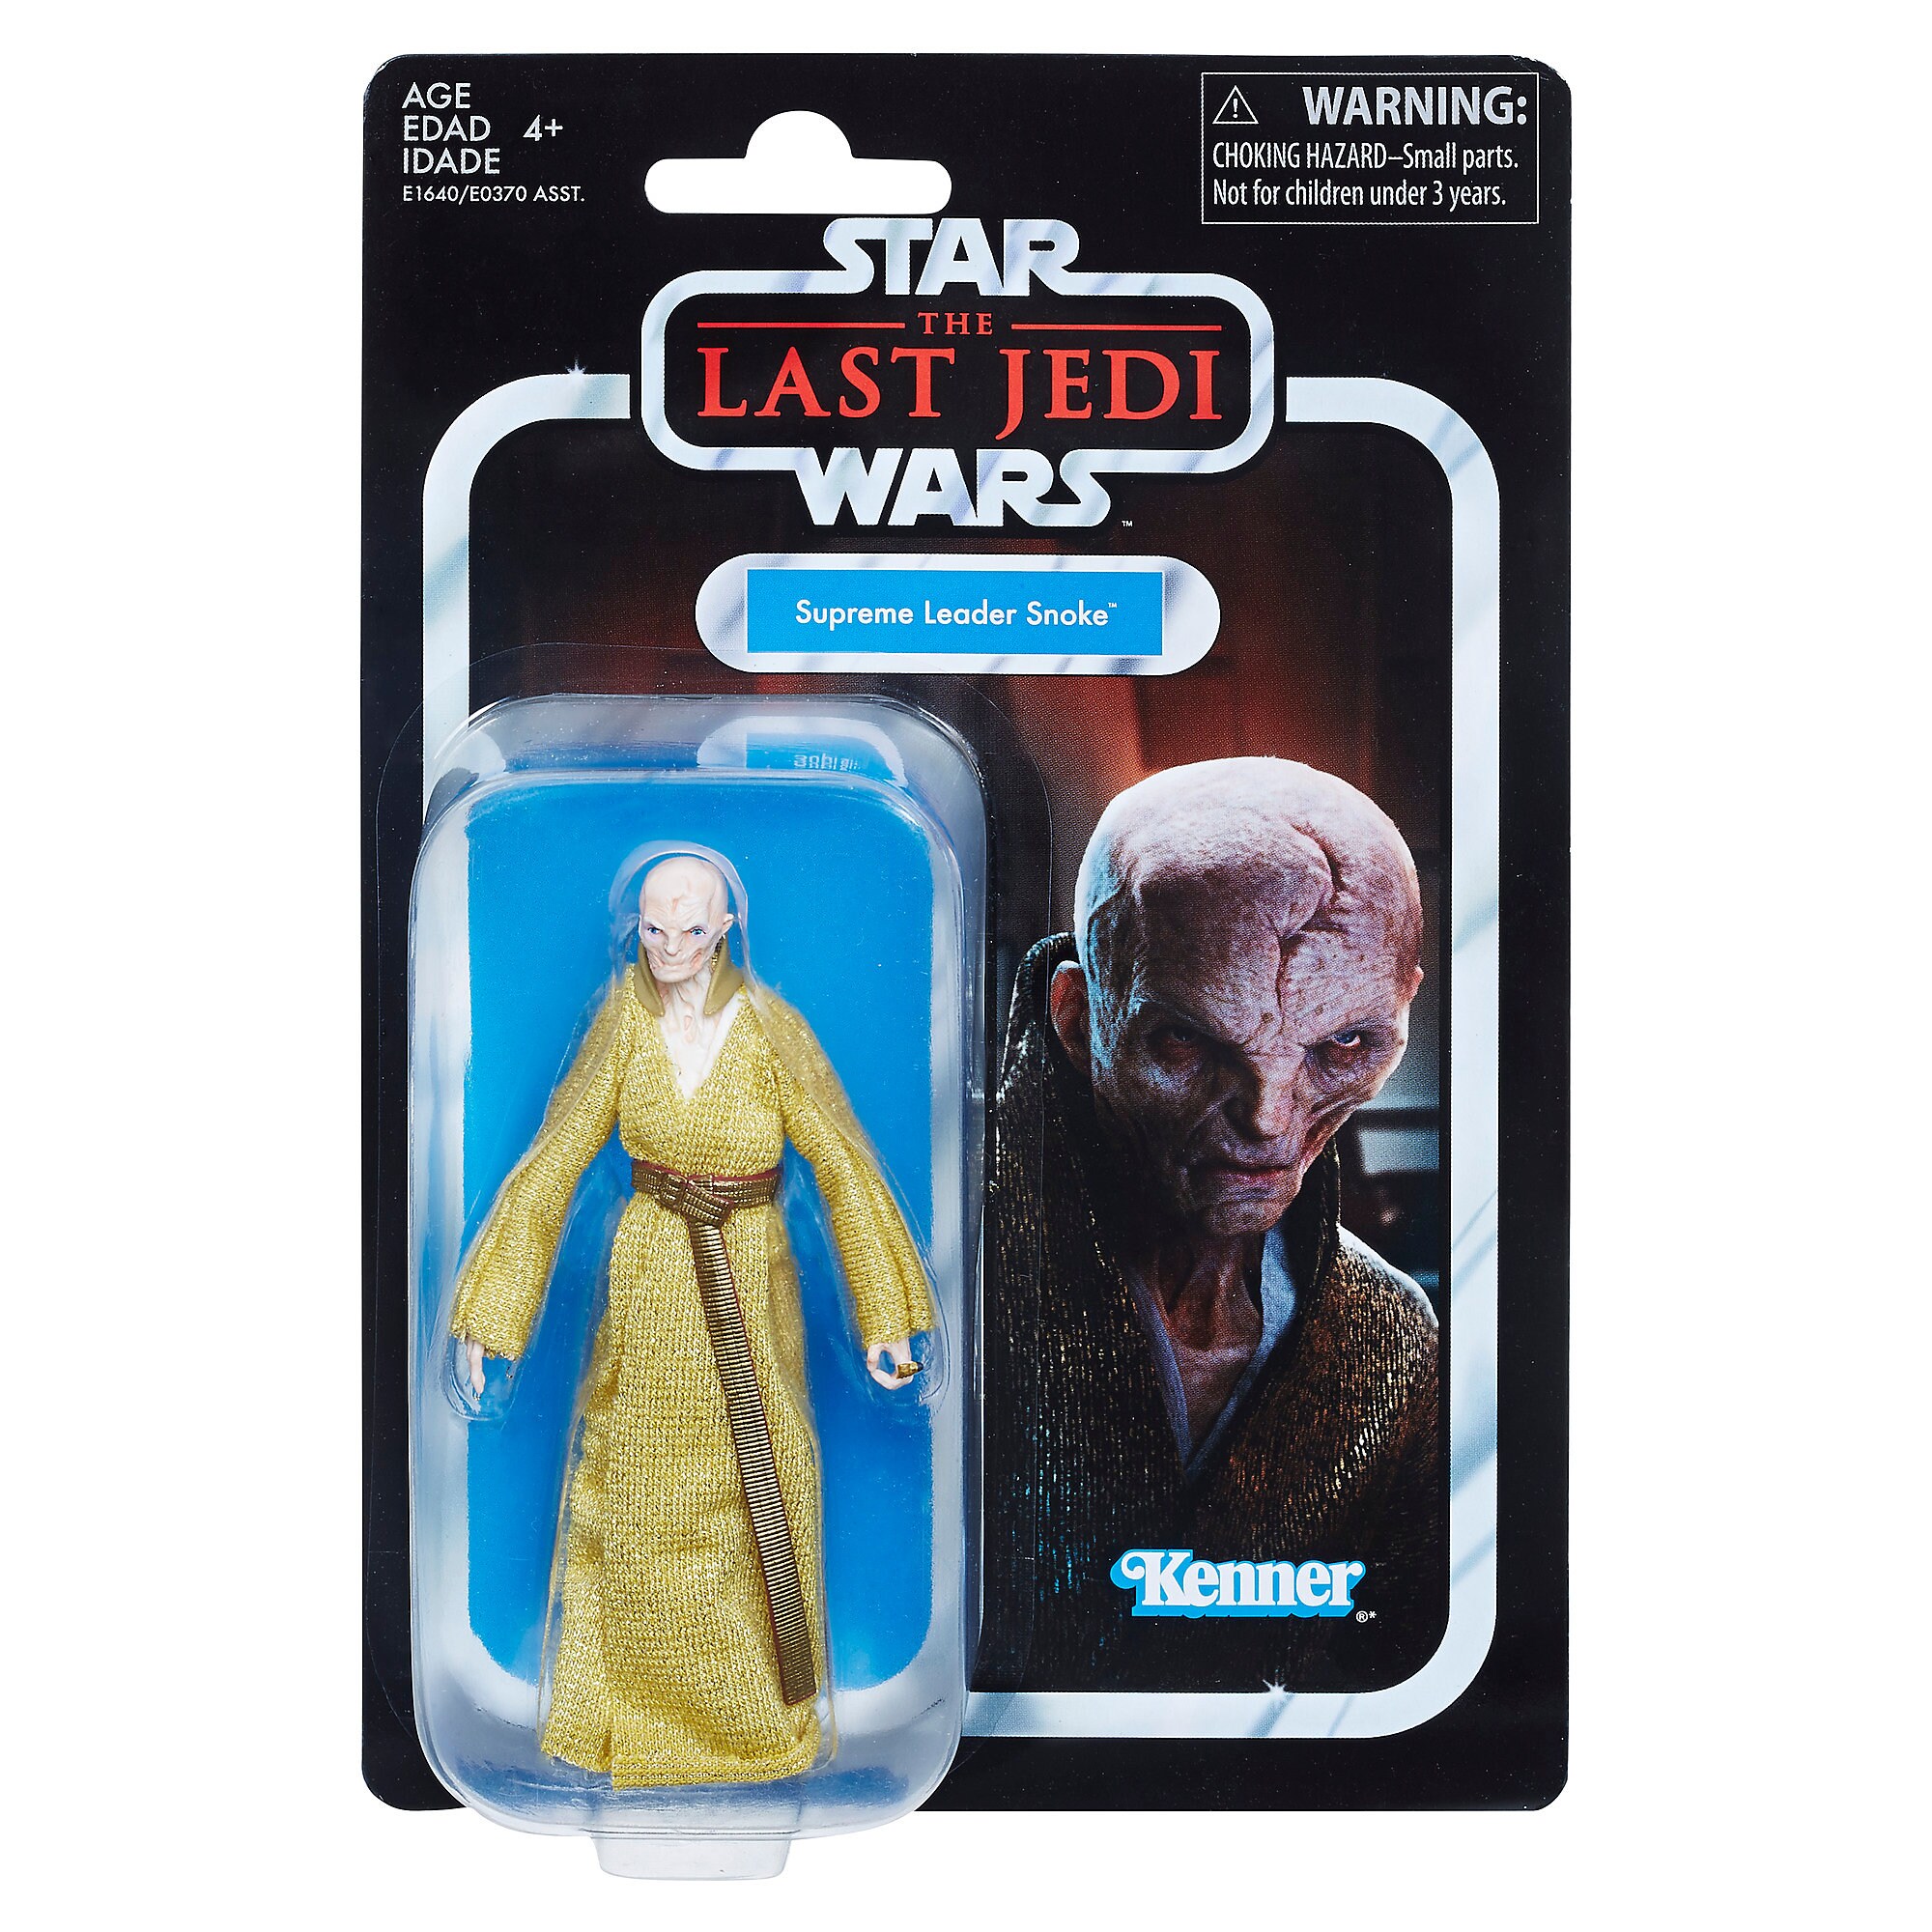 does the emporer take orders from supreme commander snoke